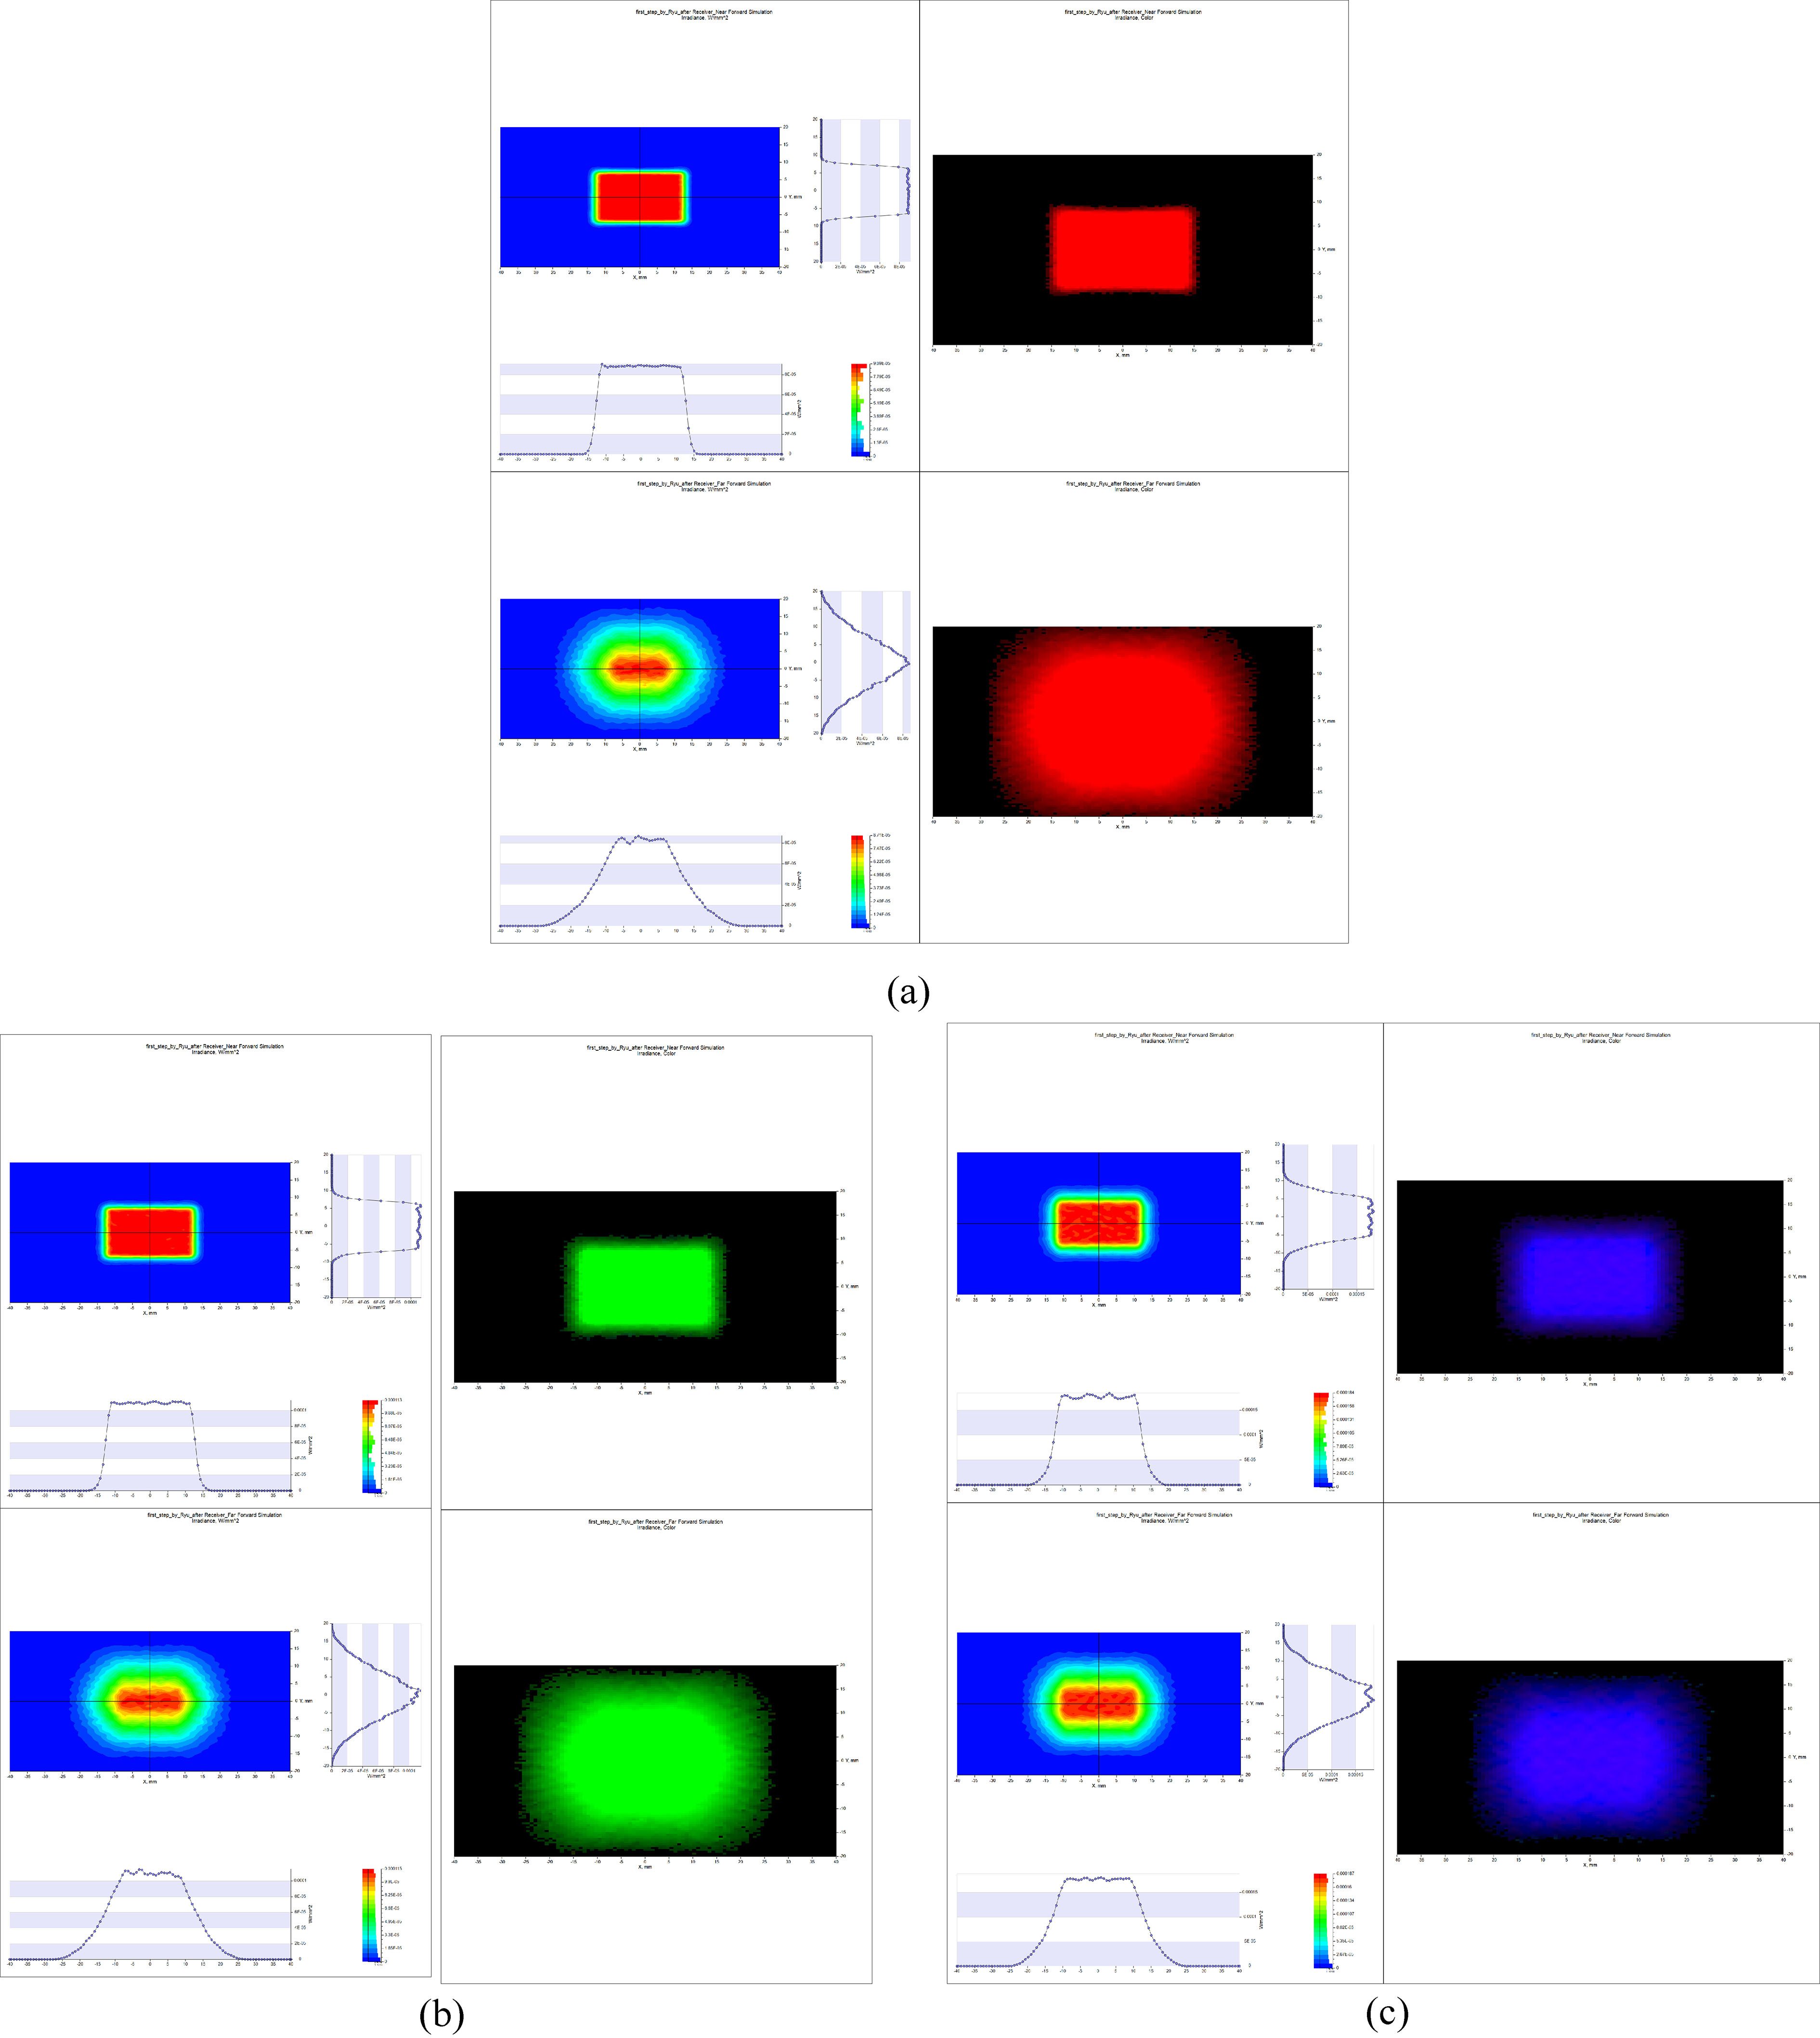 Light-intensity (left) and distribution (right) profiles for (a) red, (b) green, and (c) blue LEDs.